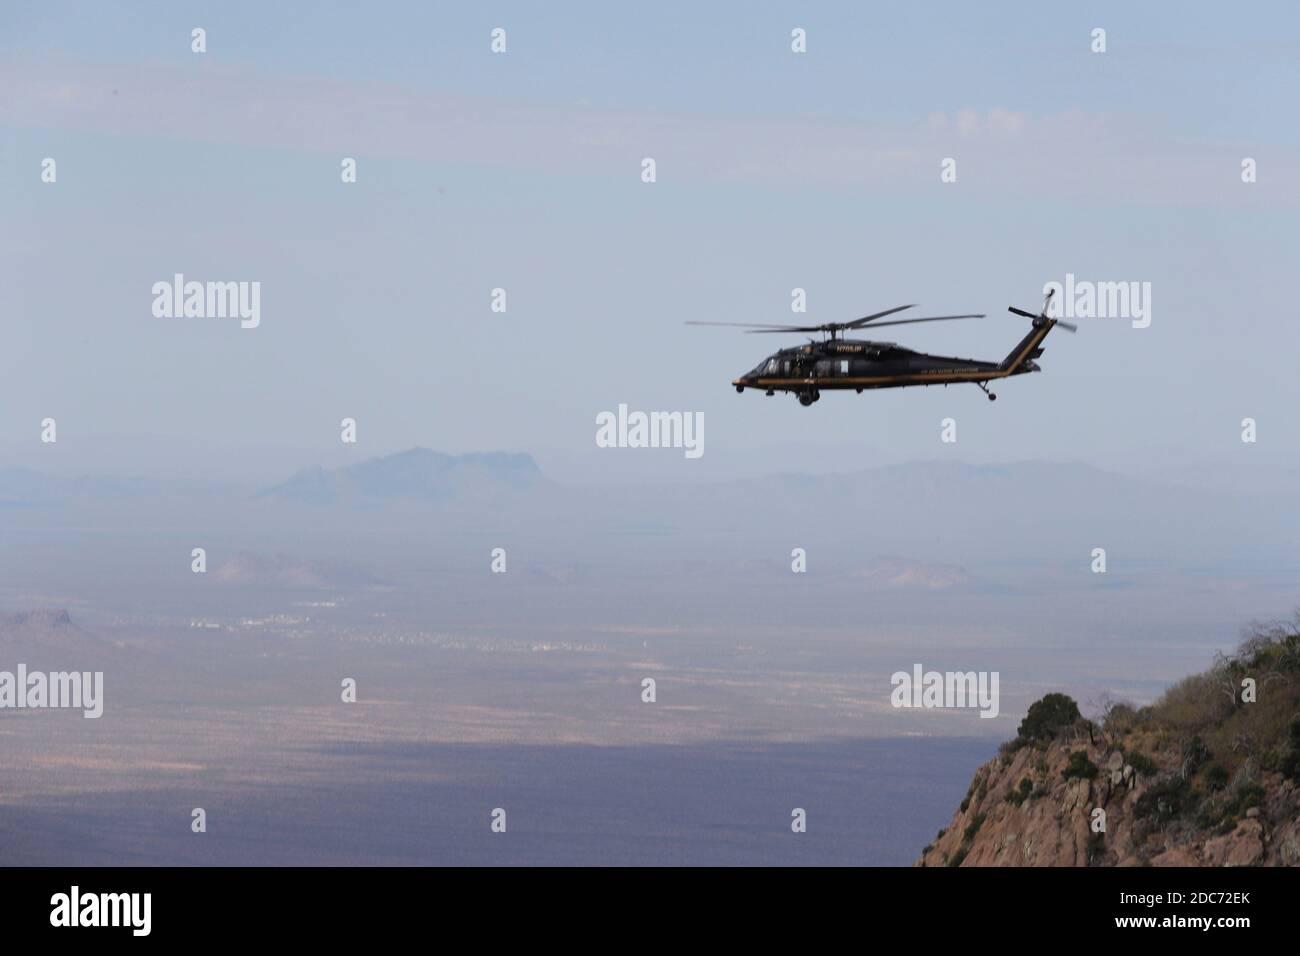 U.S. Department of Homeland Security Acting Deputy Secretary Ken Cuccinelli tours a newly constructed section of the Trump Wall by helicopter in the Tucson Sector November 2, 2020 near Tucson, Arizona. Stock Photo